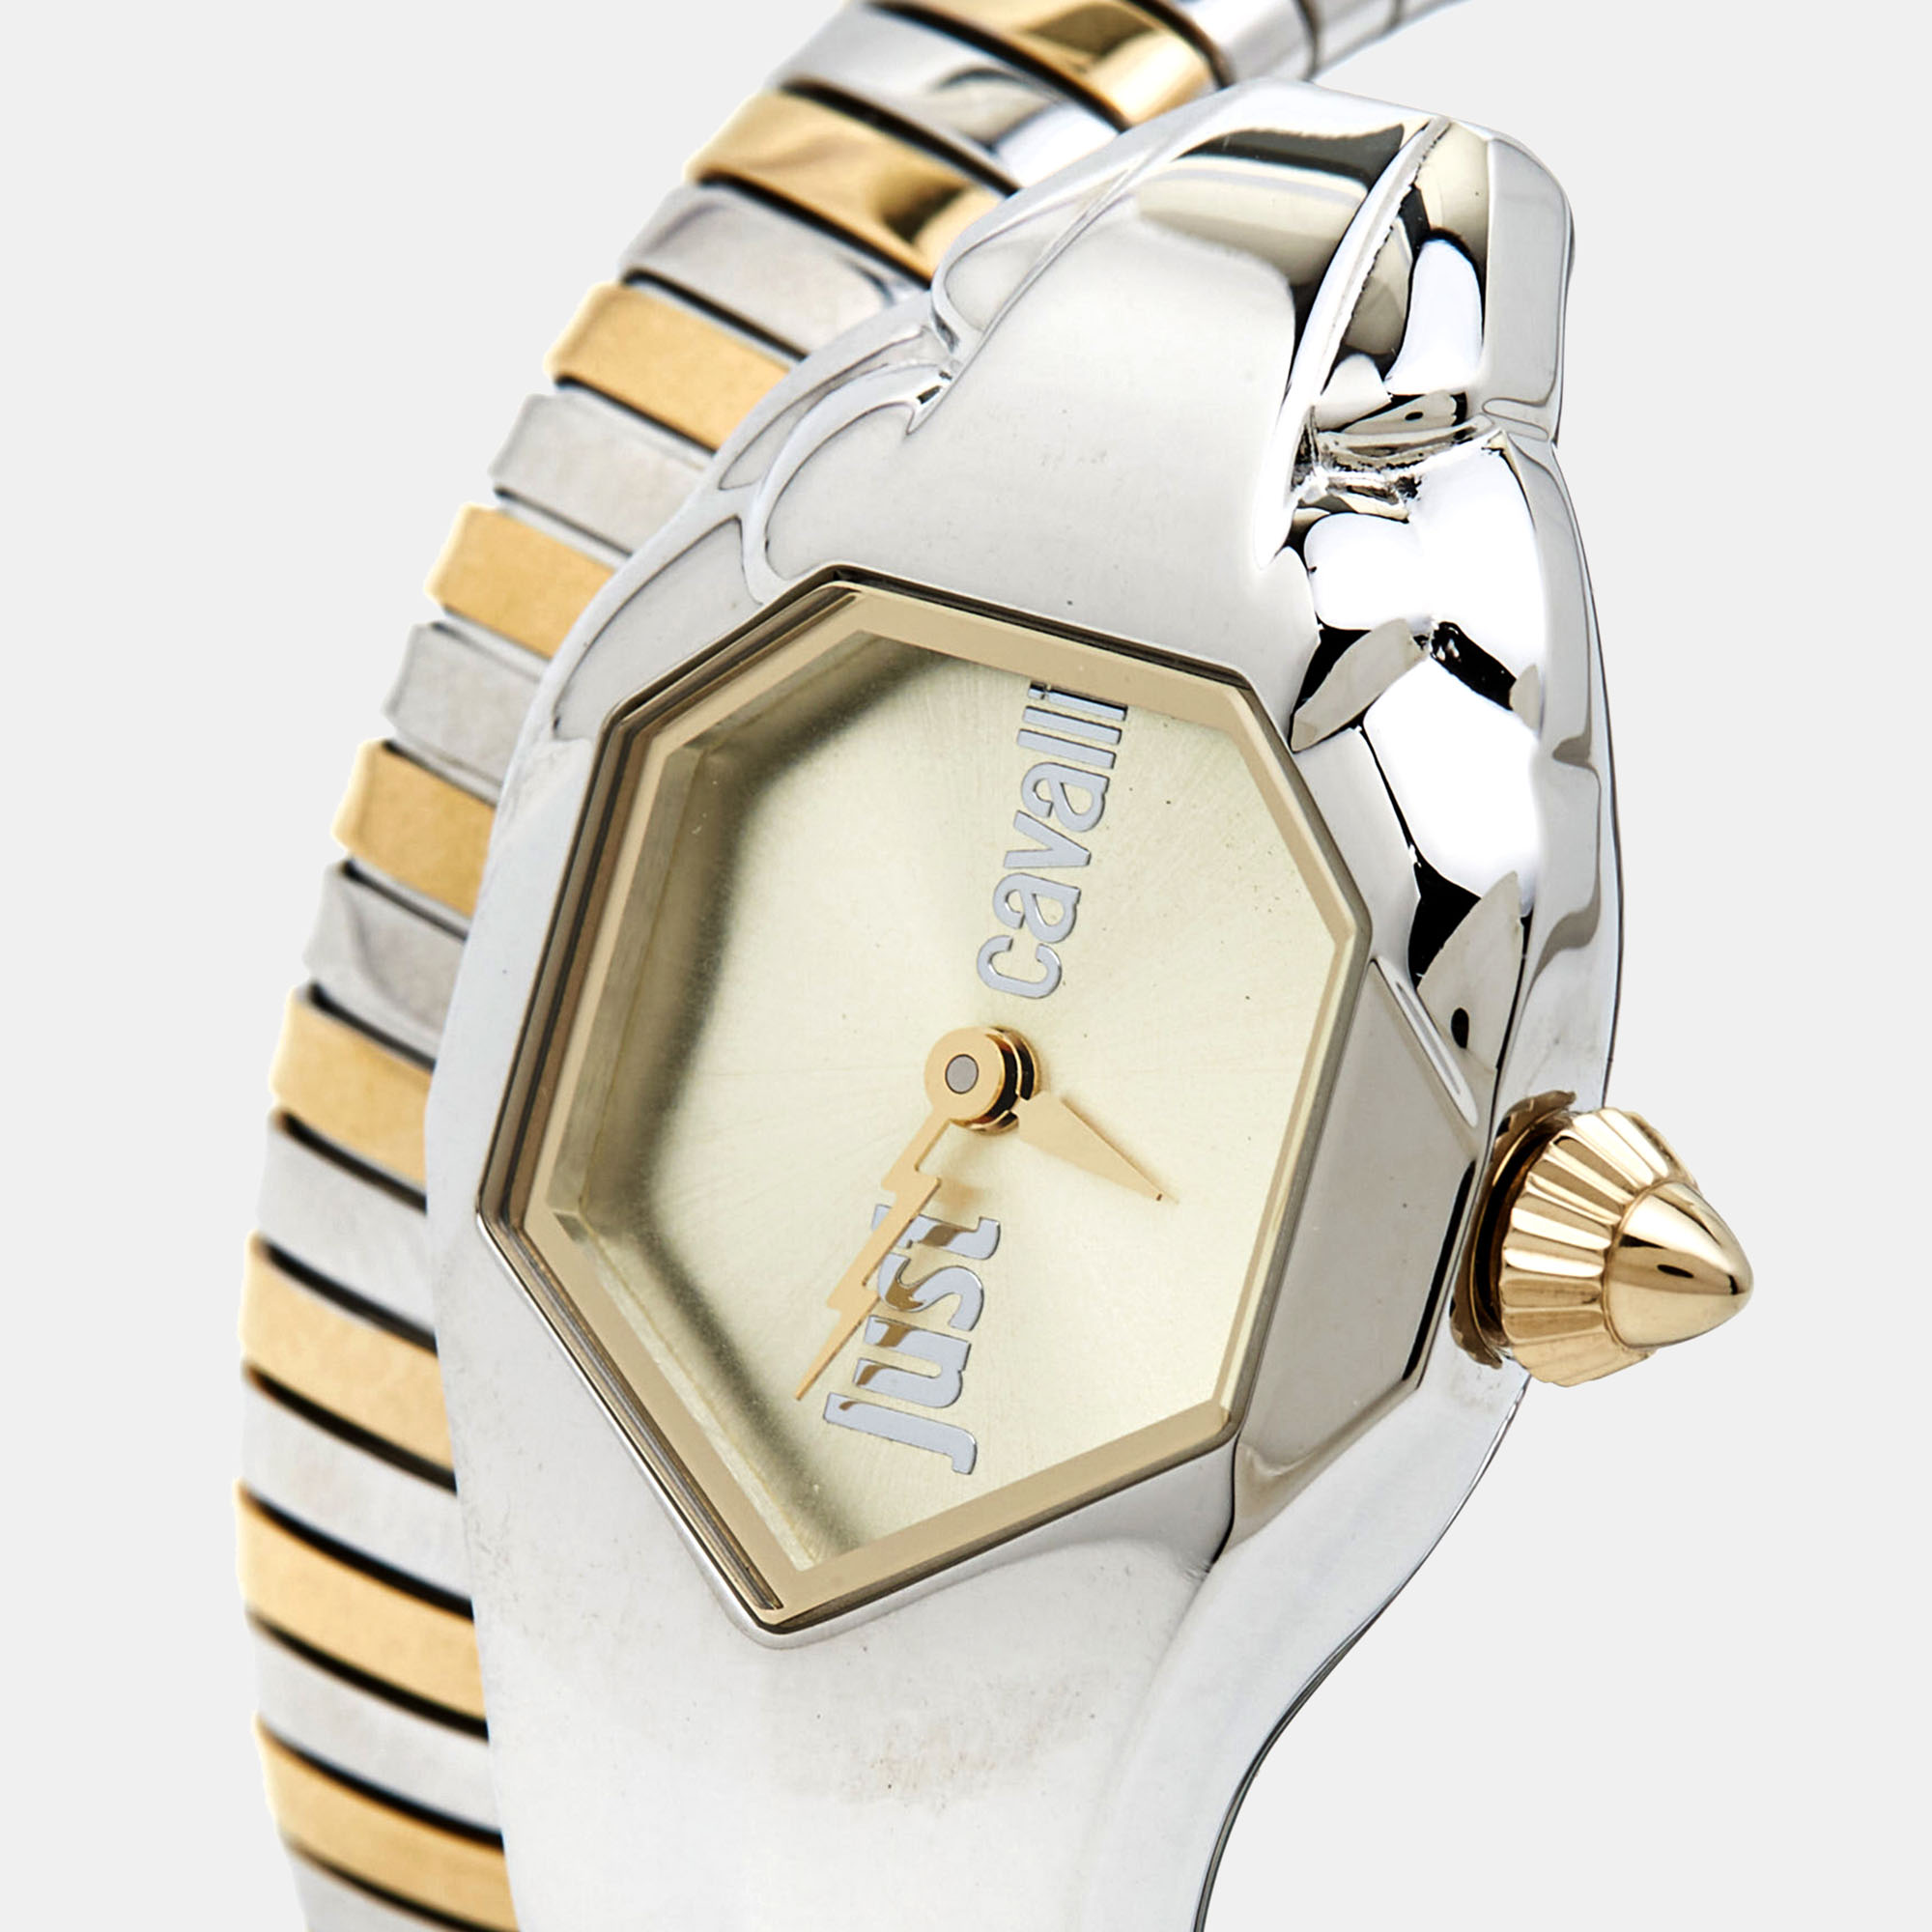 Just Cavalli Champagne Two-Tone Stainless Steel Glam Chic Snake JC1L001M0035 Women's Wristwatch 22 Mm